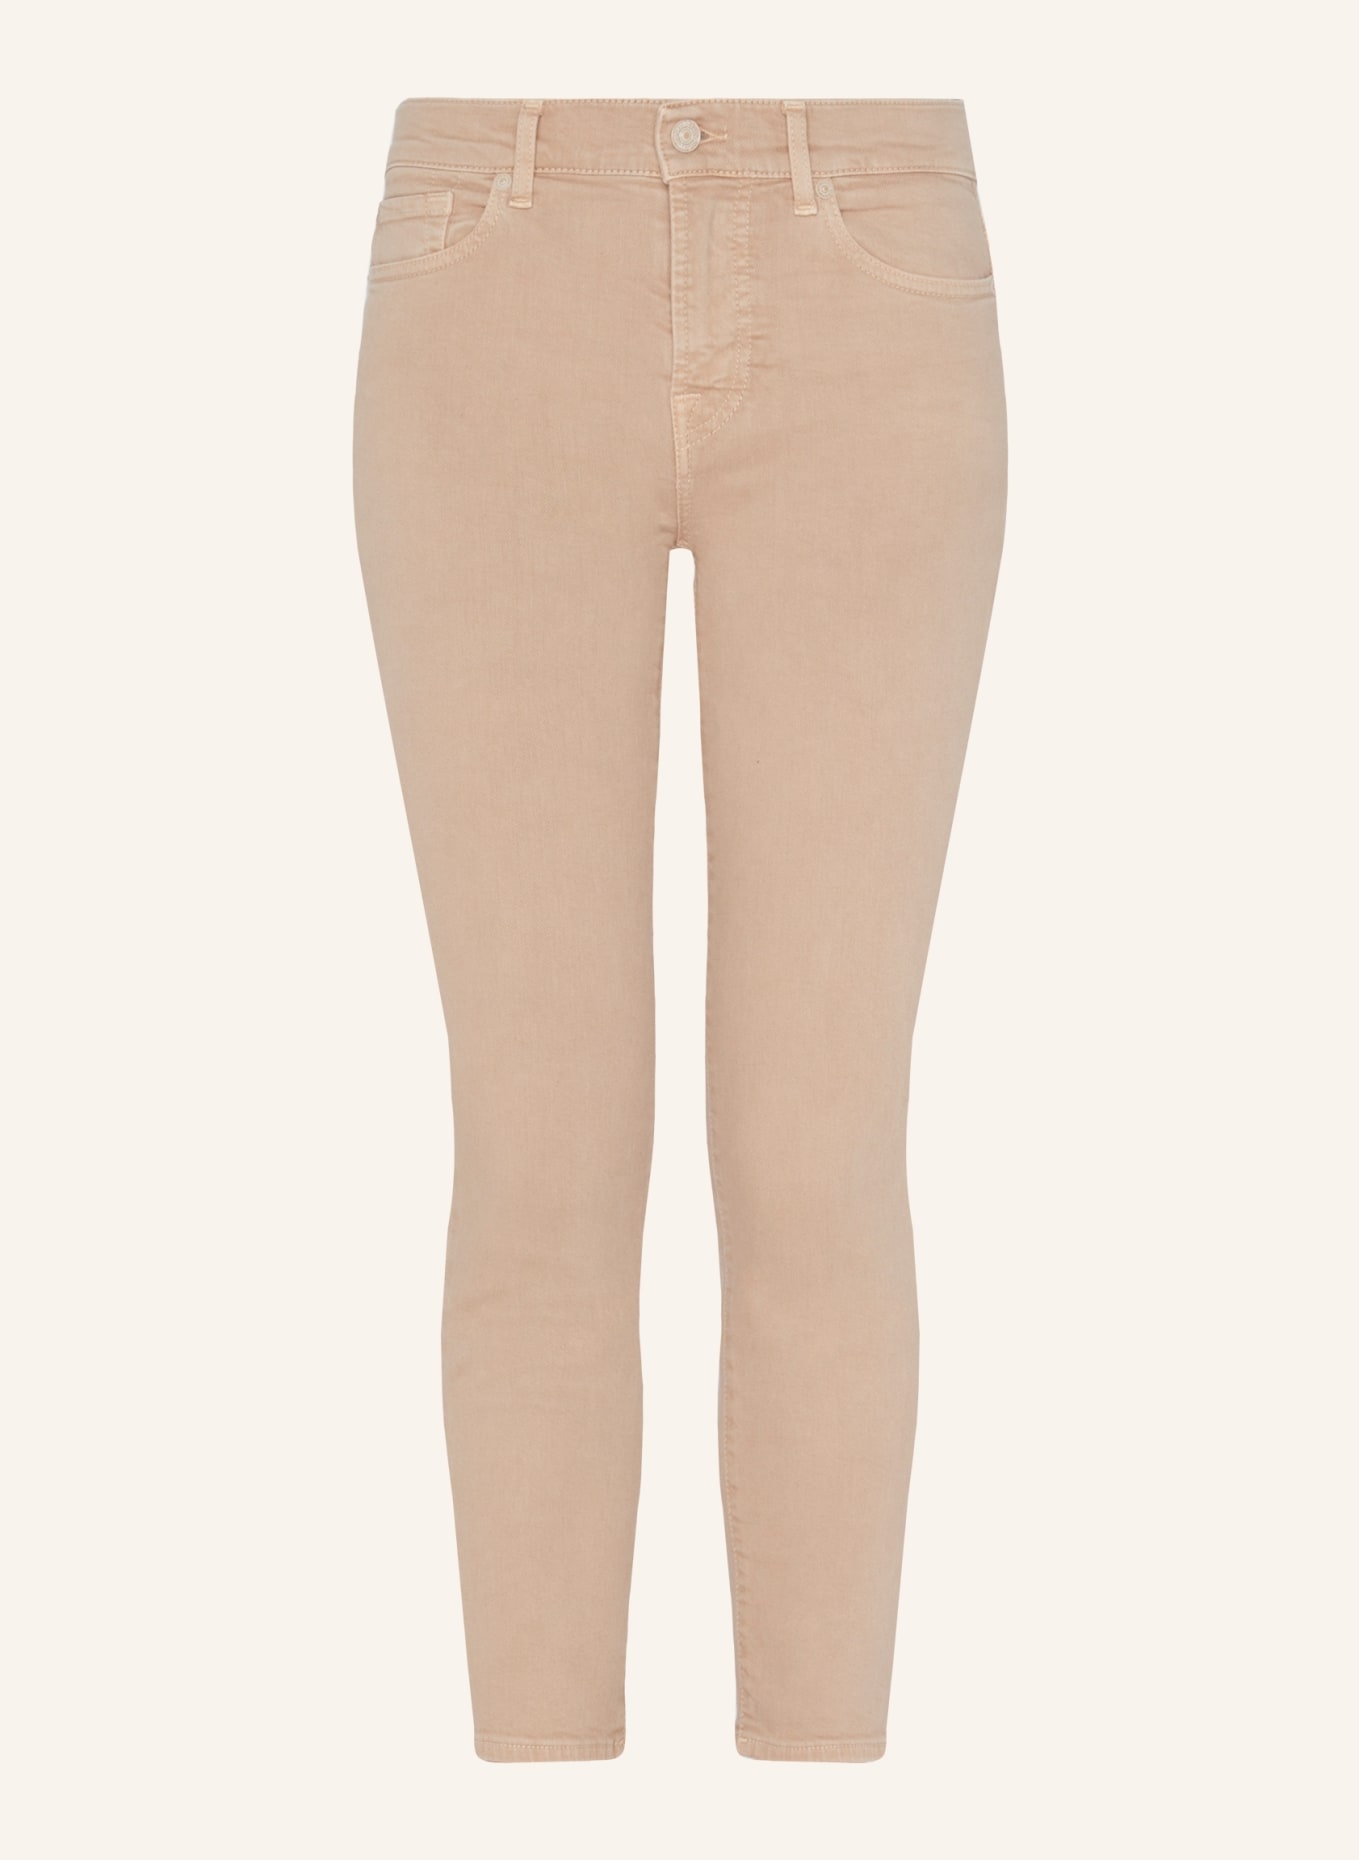 7 for all mankind Pants  ROXANNE ANKLE Slim Fit, Farbe: BEIGE (Bild 1)